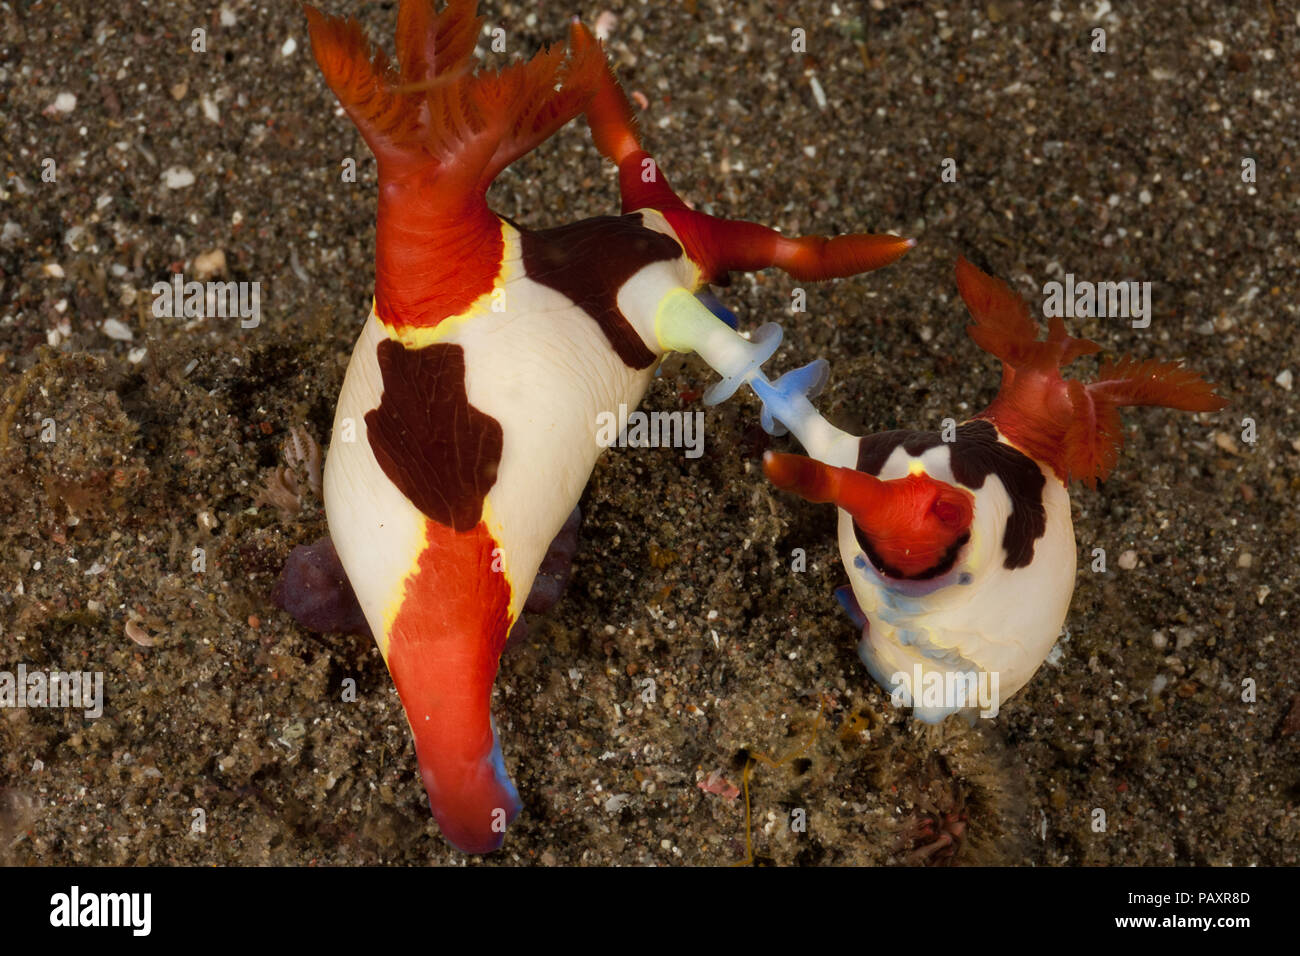 A pair of red-gilled nudibranches, Nembrotha purpureolineata, mating on a sandy bottom in Horseshoe Bay off Rinca Island, Komodo, Indonesia. Stock Photo